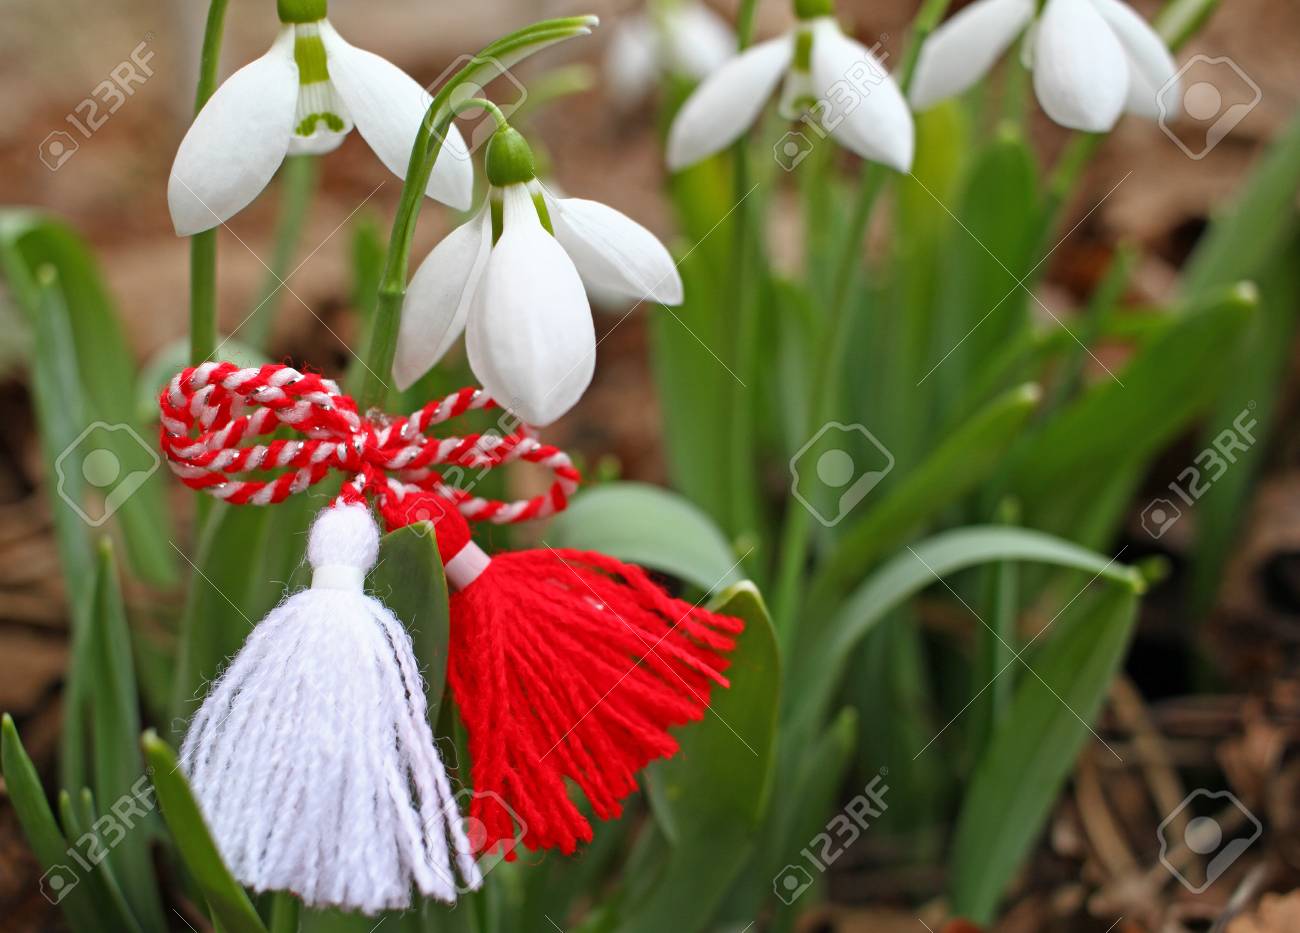 117811616 snowdrops and martenitsa symbols of spring white snowdrop flowers and martisor baba marta holiday tr